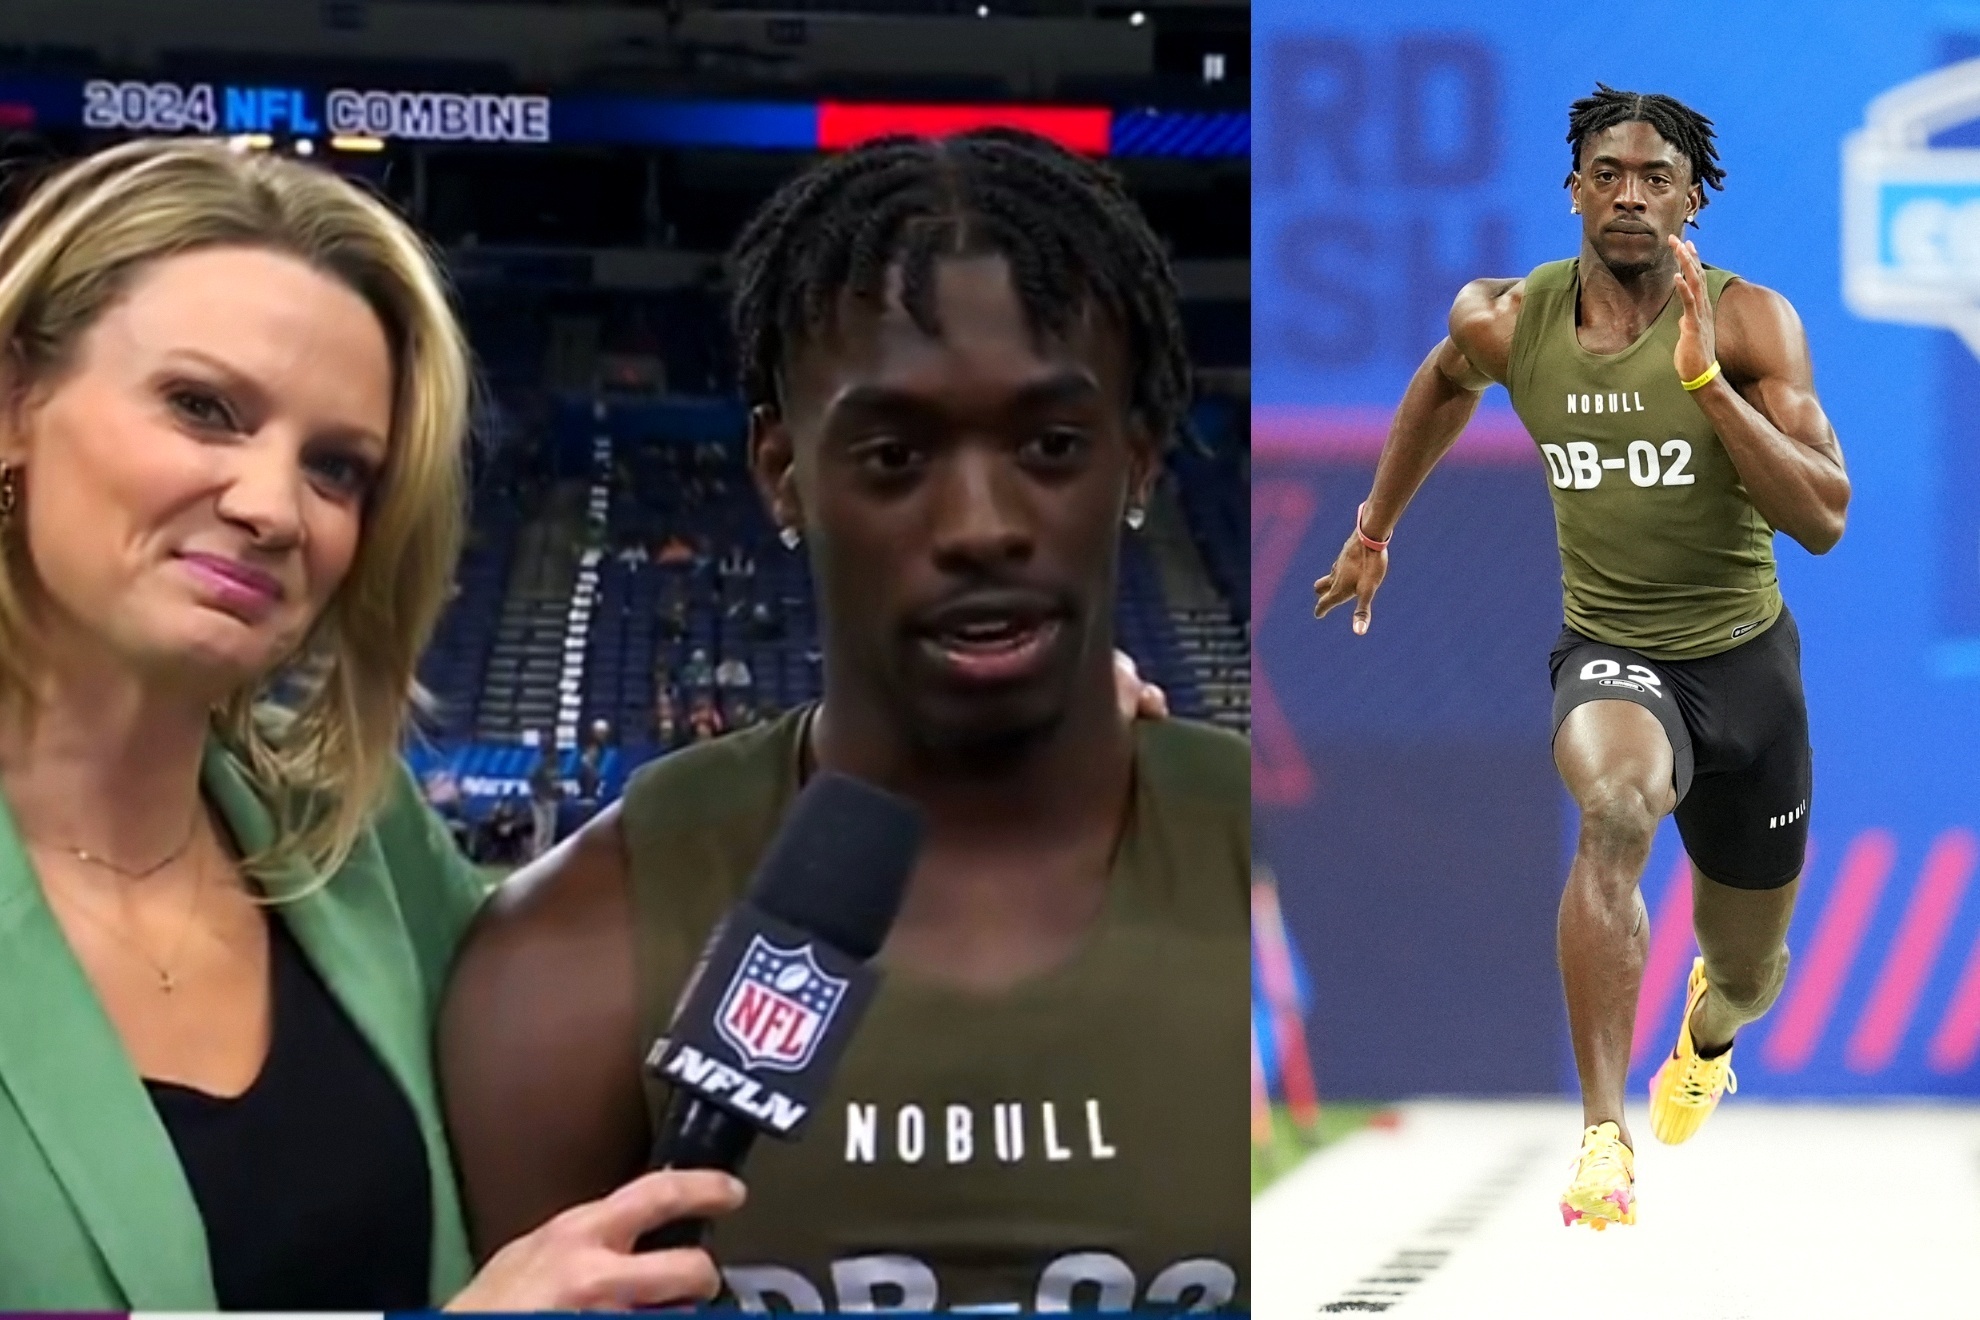 Stacey Dales interviews Terrion Arnold at 2024 NFL Combine.